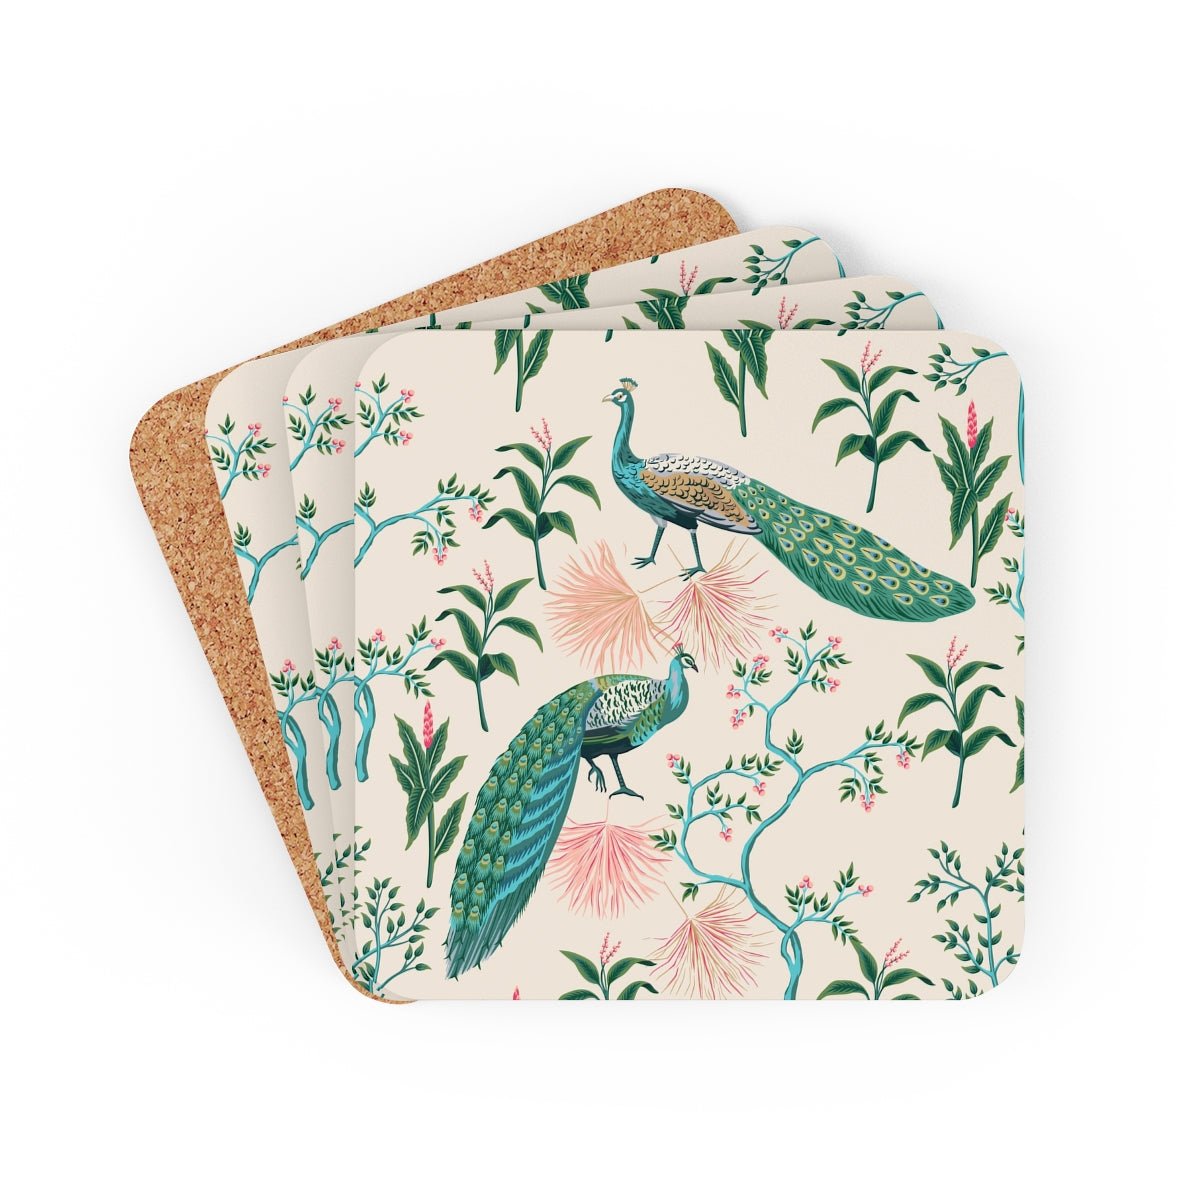 Chinoiserie Peacocks Corkwood Coaster Set - Puffin Lime